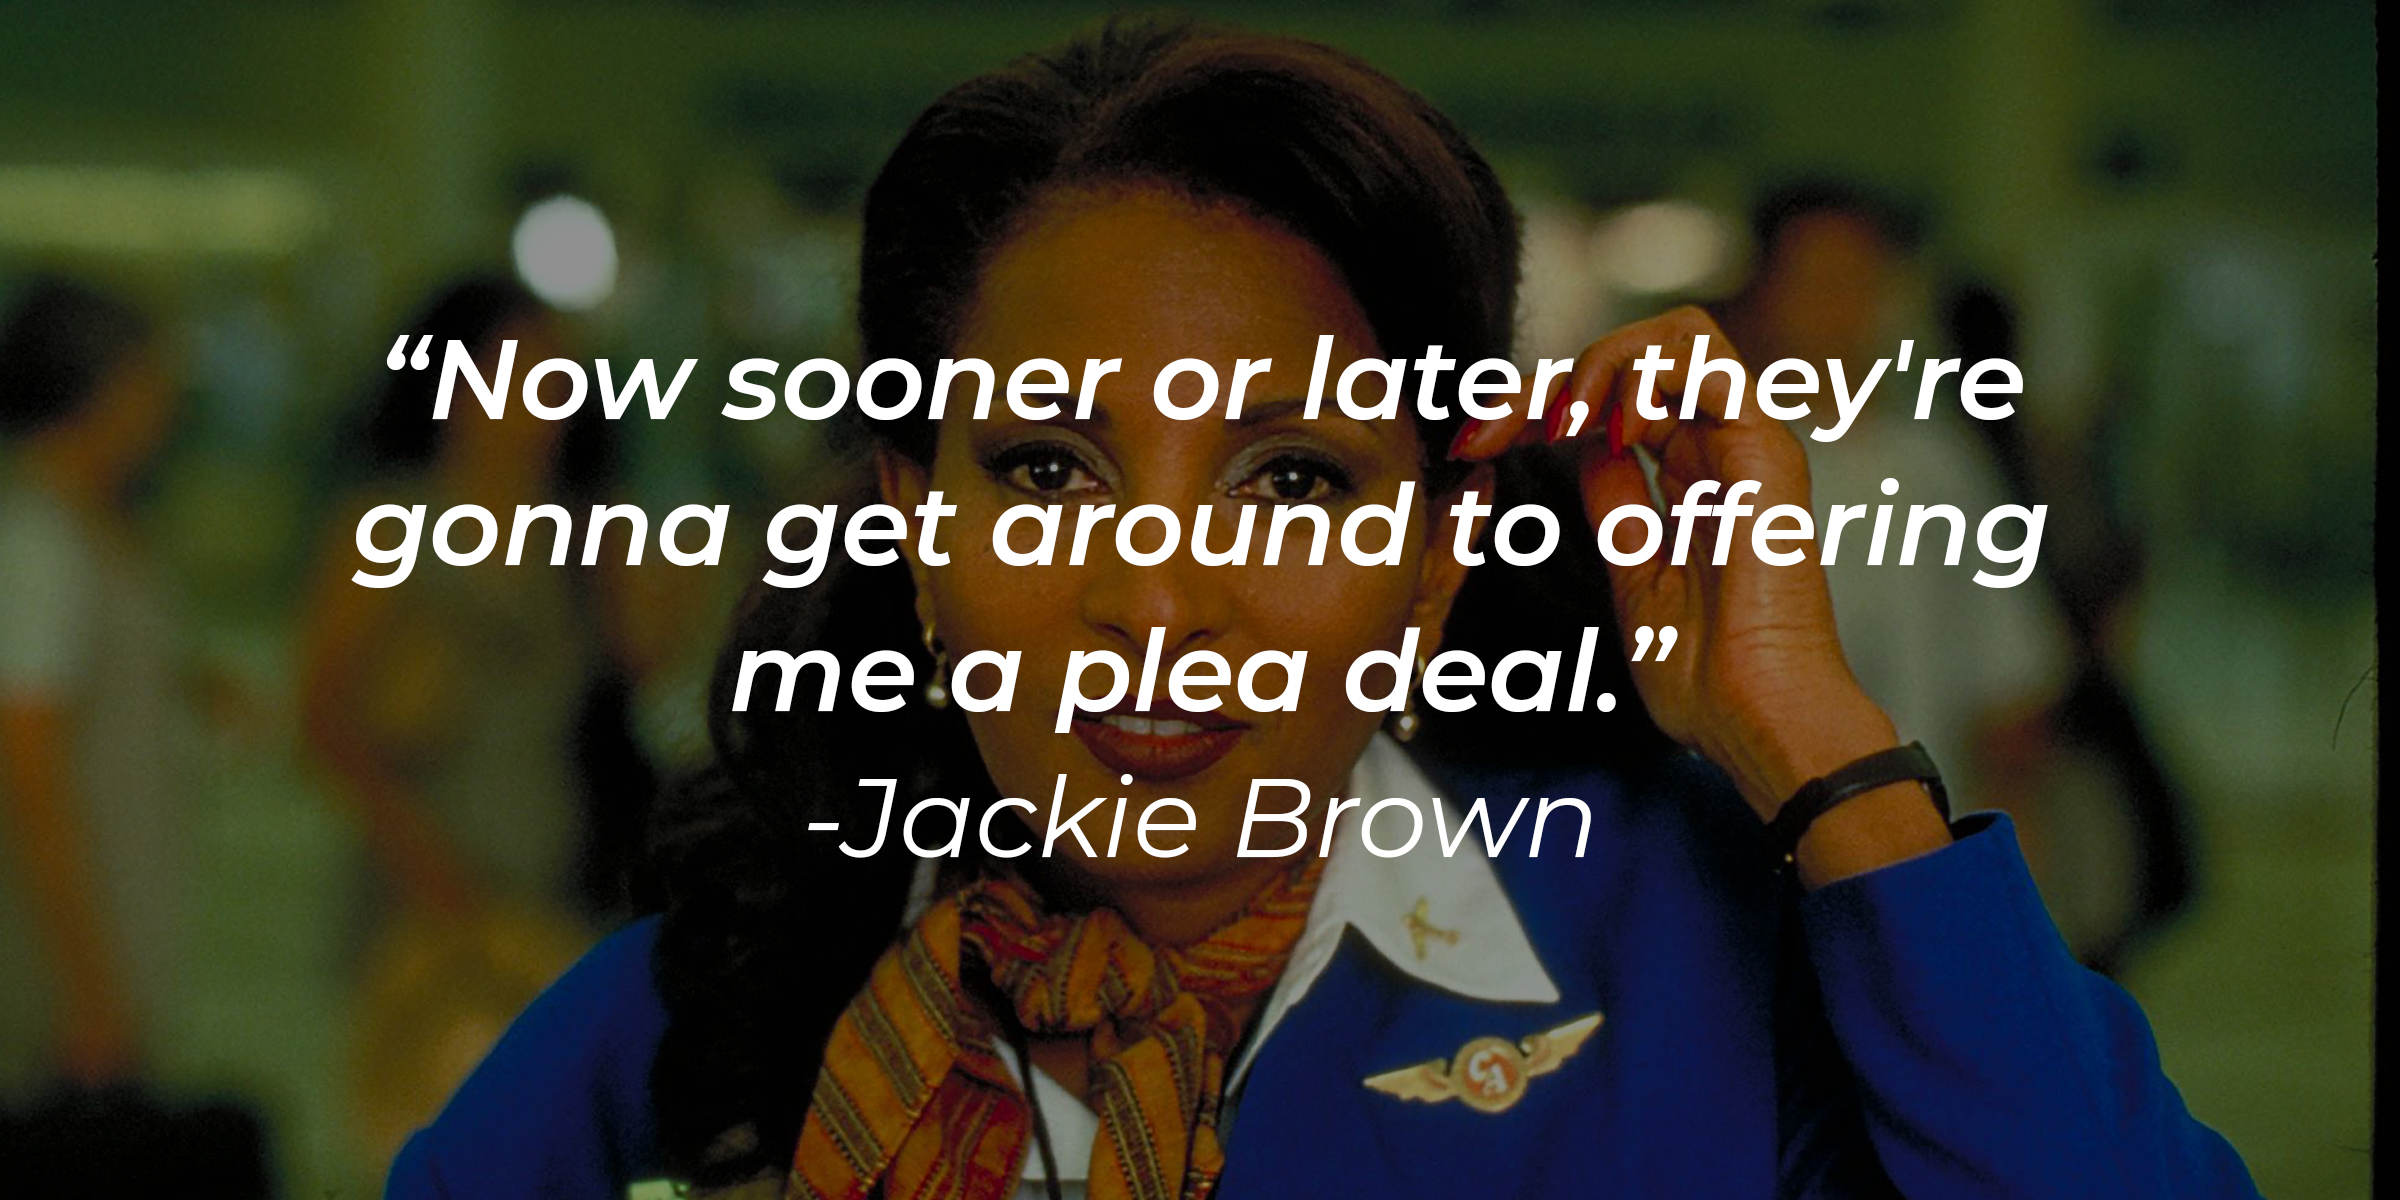 Jackie Brown's quote: "Now sooner or later, they're gonna get around to offering me a plea deal." | Source: Facebook/JackieBrownMovie